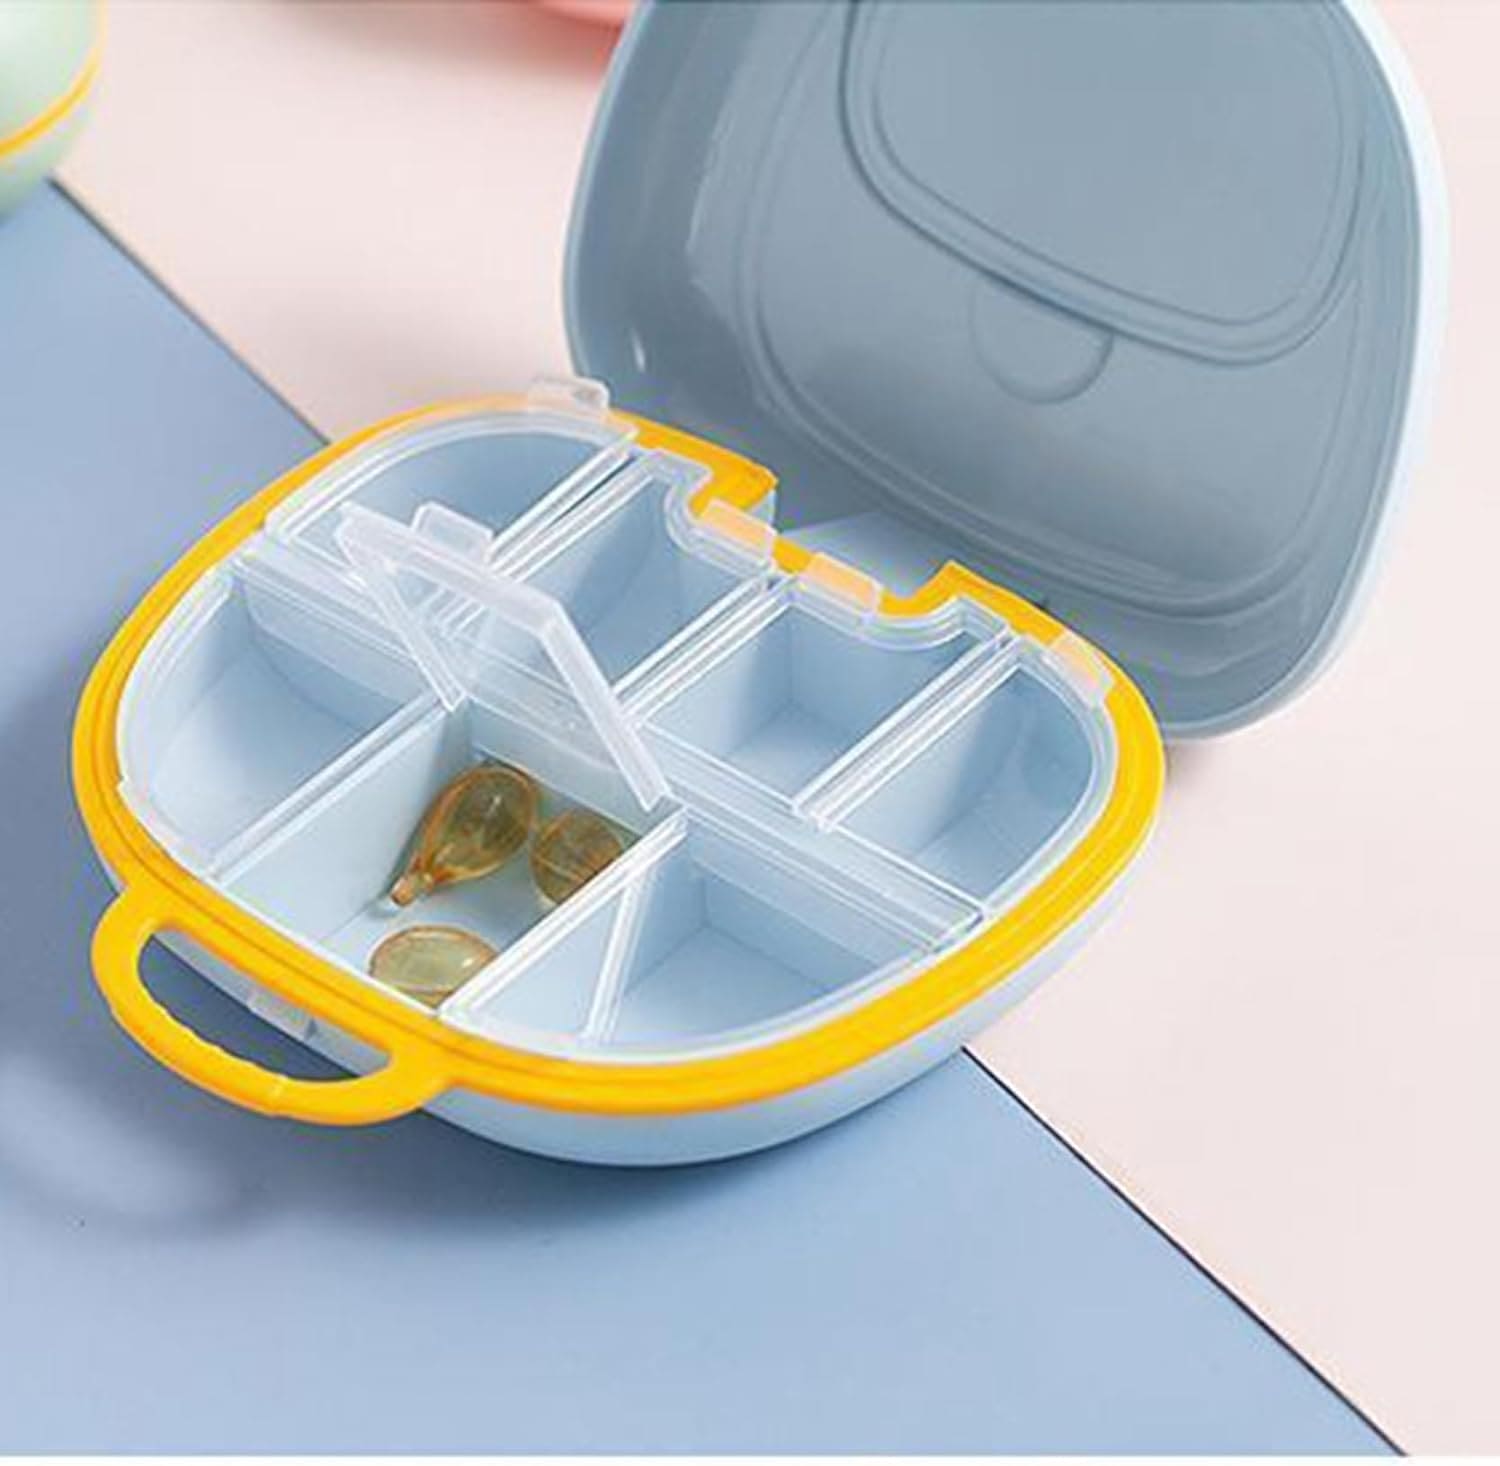 Briefcase Pill Box, Splitters Pill Case Holder, Portable 7 Grid Mini Pill Box, Outdoor Travel Pill Protect Container, Tablet Storage Dispenser Container